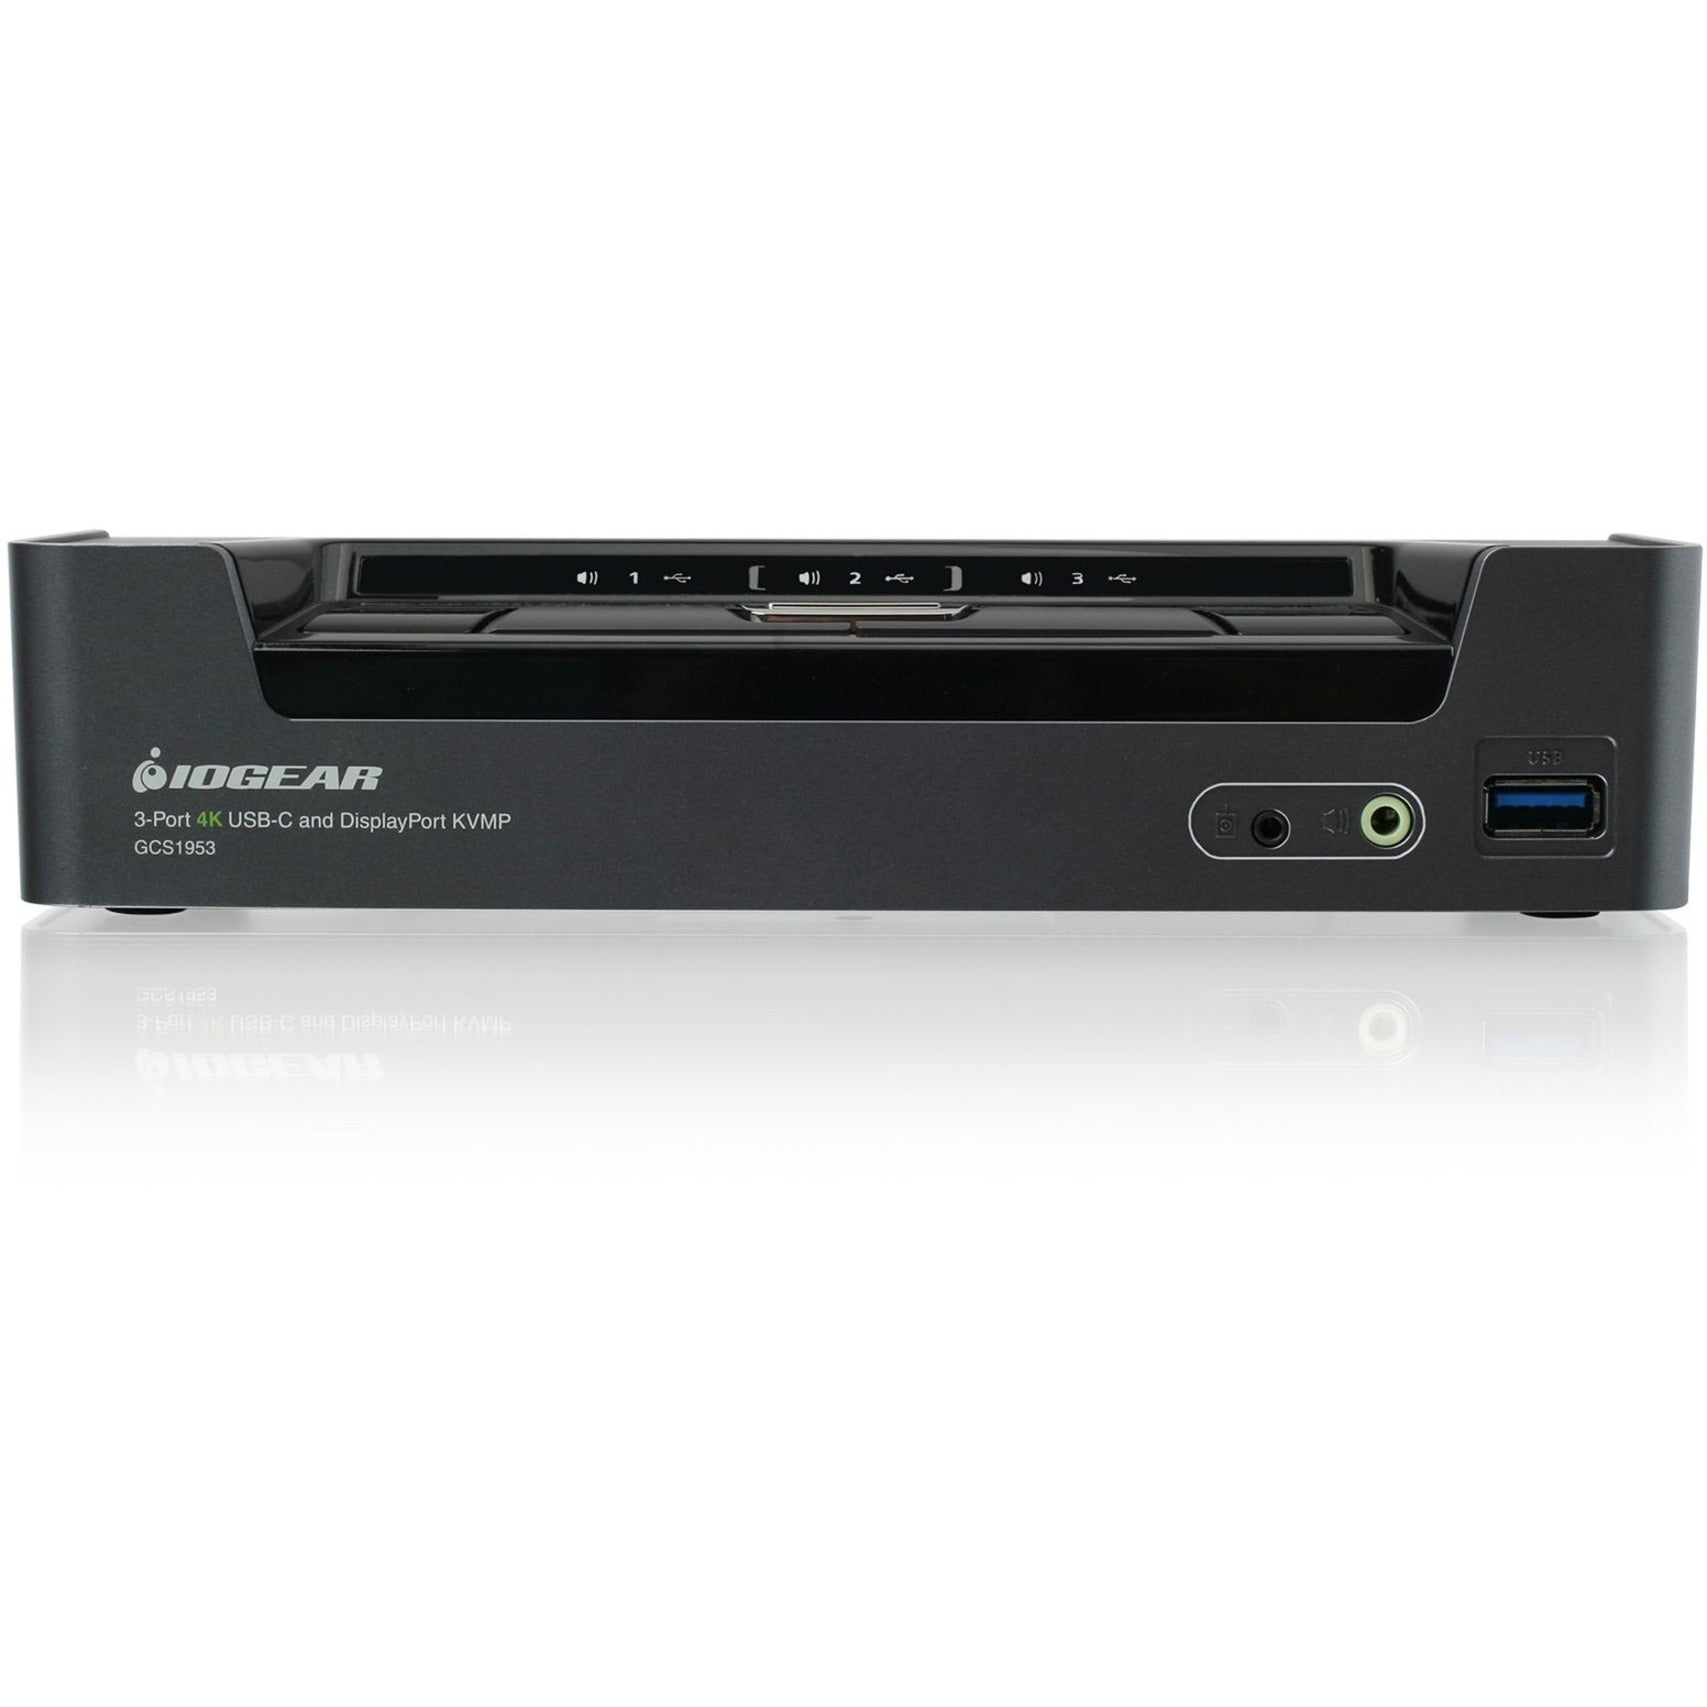 IOGEAR GCS1953 3-Port 4K USB-C and DisplayPort KVMP Switch with Power Delivery, USB and DisplayPort Switch for Multiple Computers